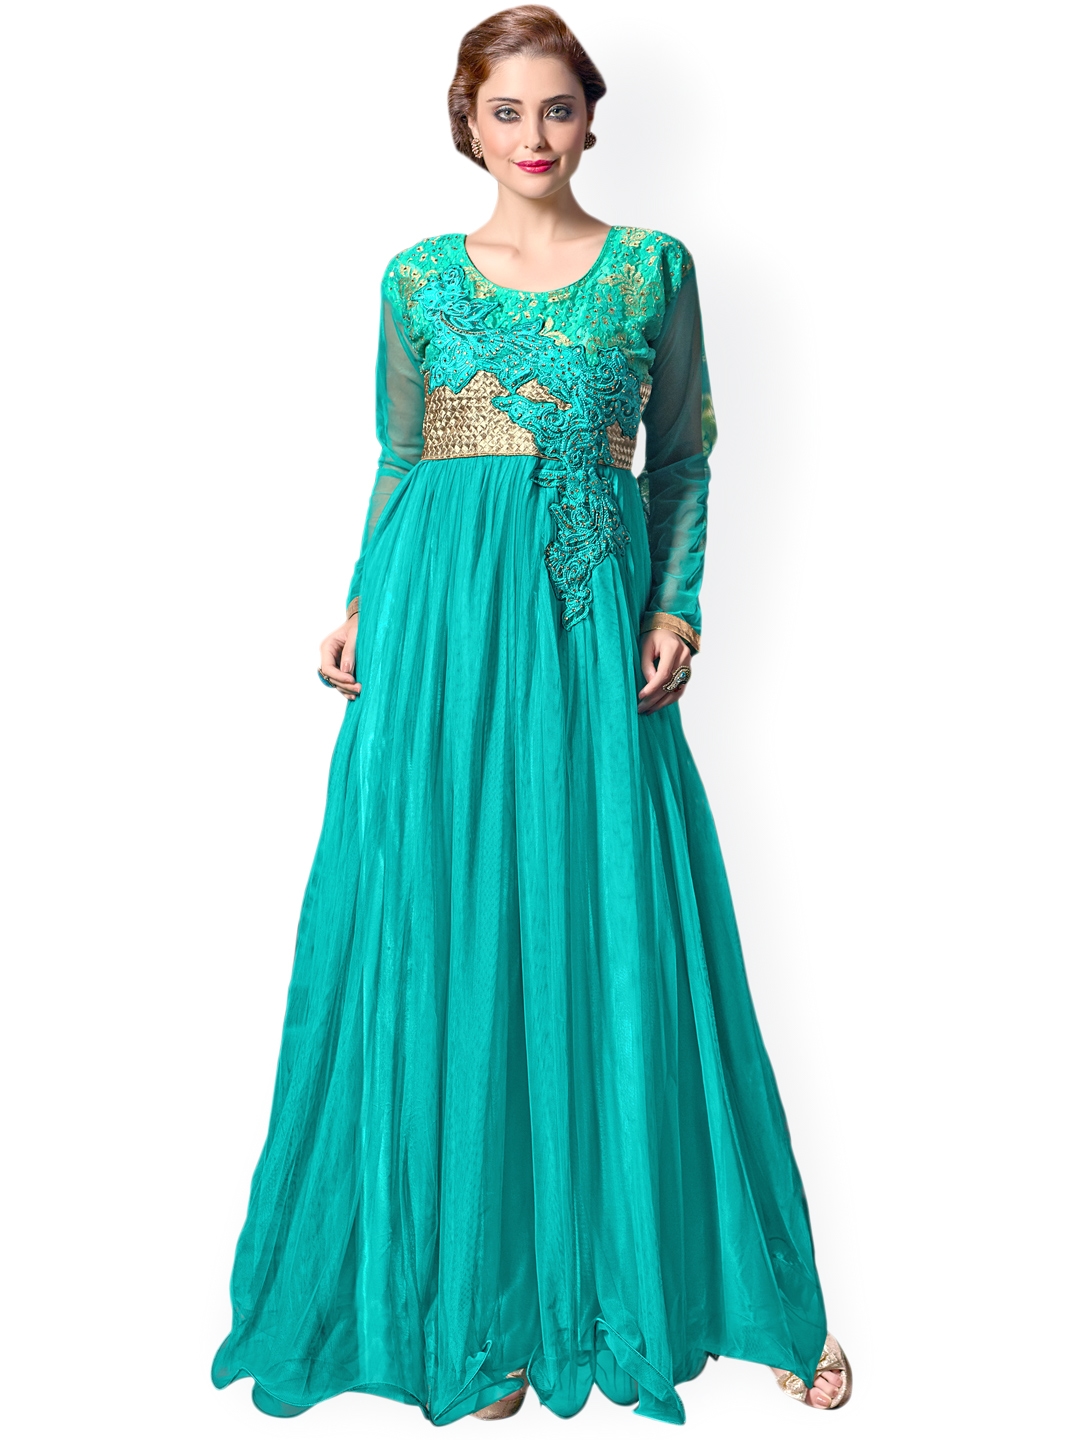 Buy PATEL Fashion Women's Taffeta Silk Embroidered Semi-Stitched Anarkali  Gown | womens Today preminum gowns collection 2018 dress at Amazon.in